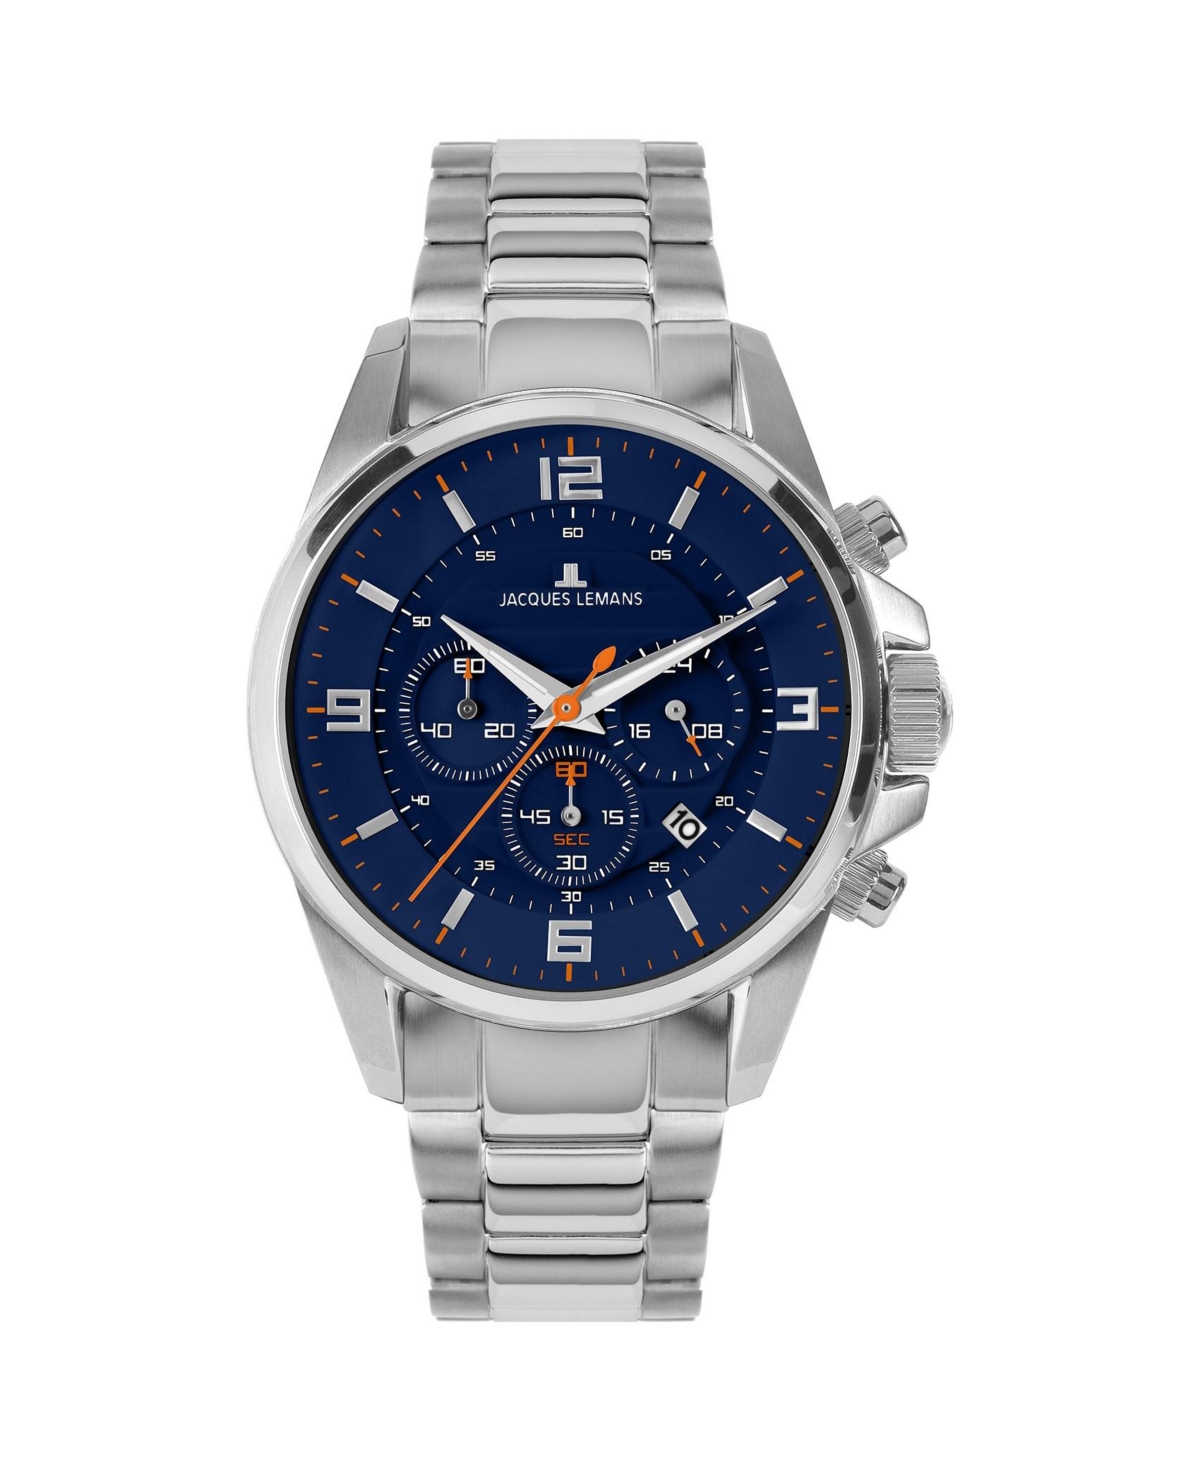 Men's Liverpool Watch with Solid Stainless Steel Band, Chronograph 1-2118 - Dark blue